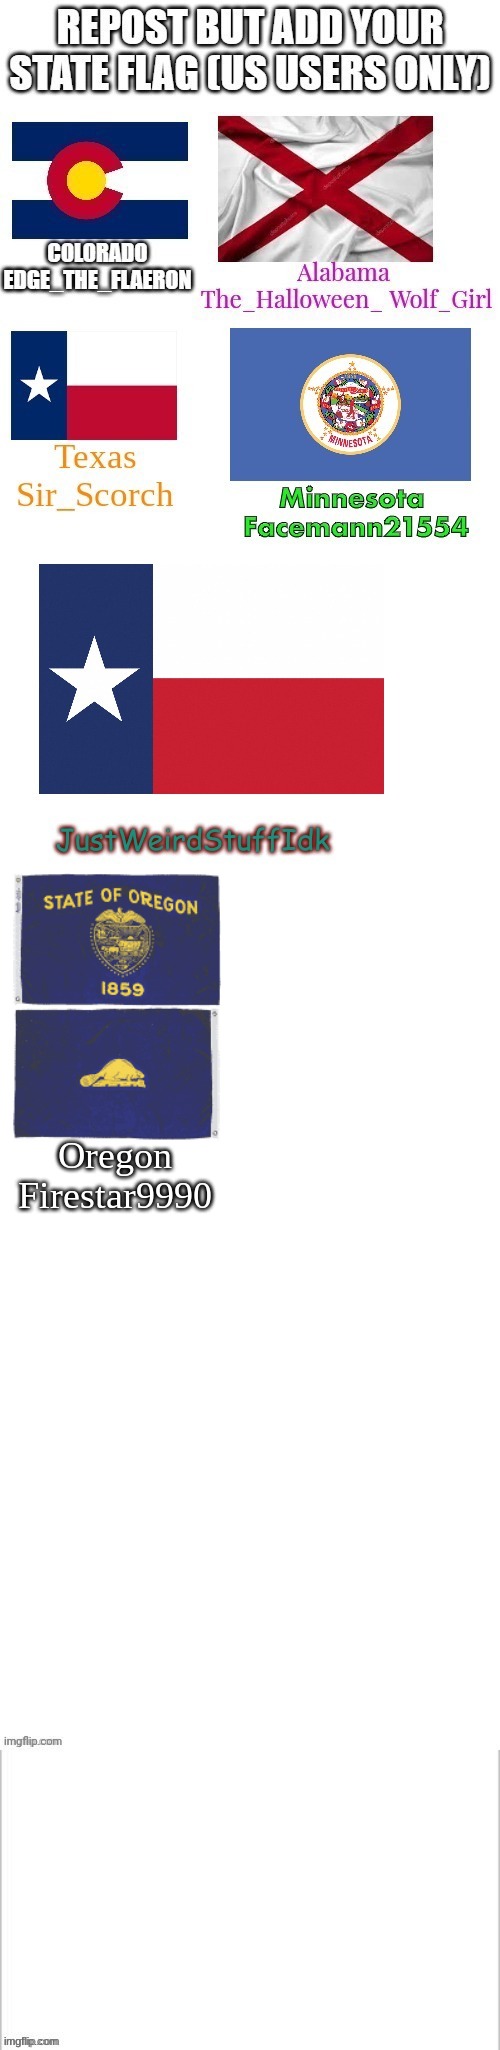 only state with 2 sides to its flag | Oregon
Firestar9990 | made w/ Imgflip meme maker